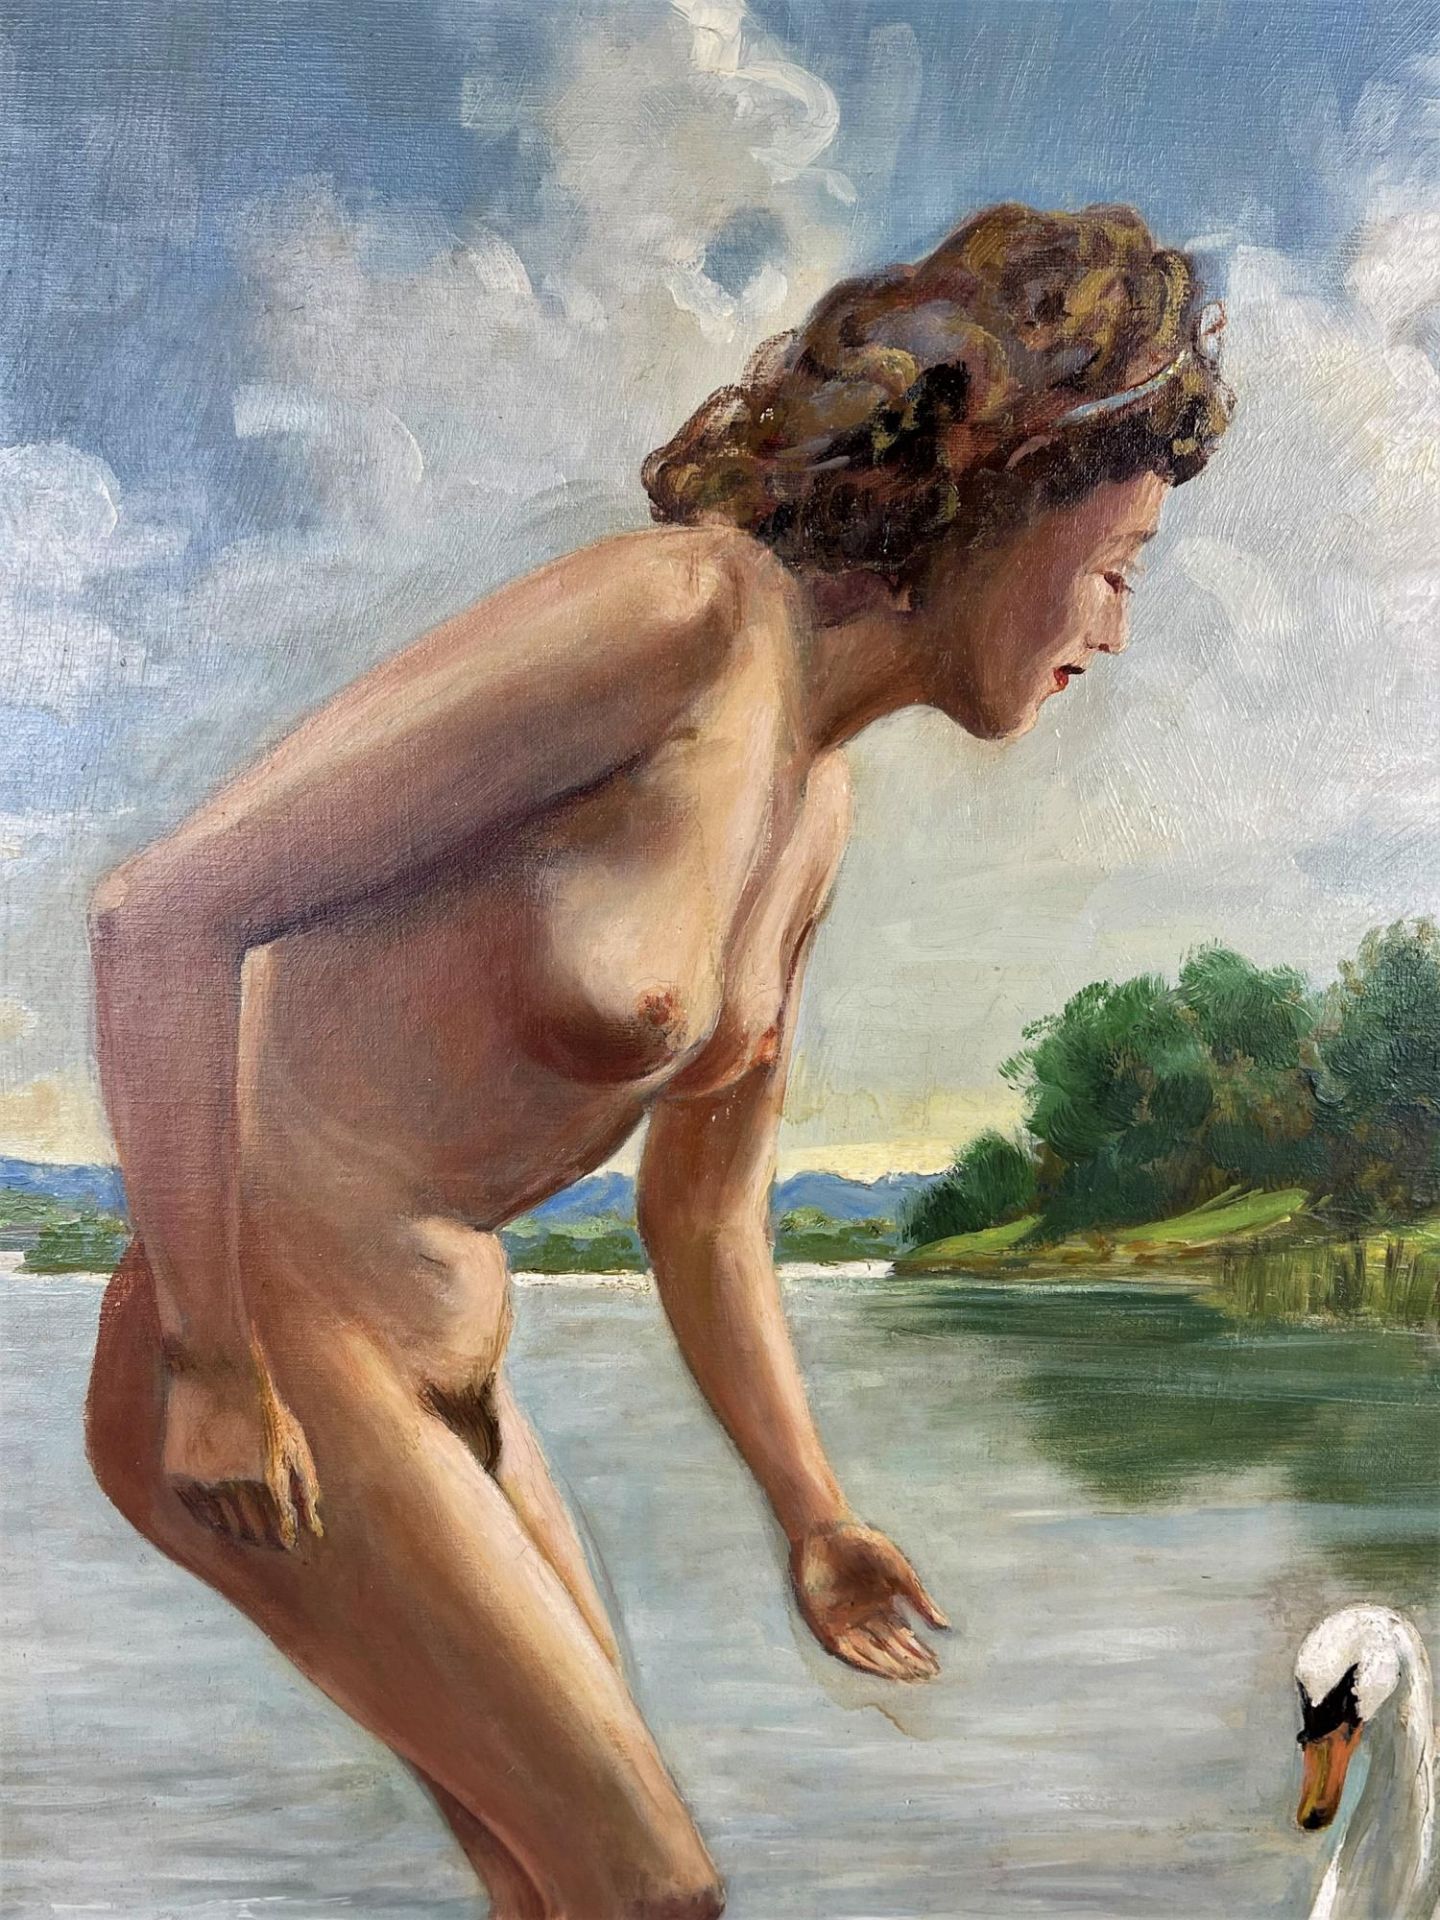 Oil painting "Bathers with swan", 1954 - Image 3 of 6